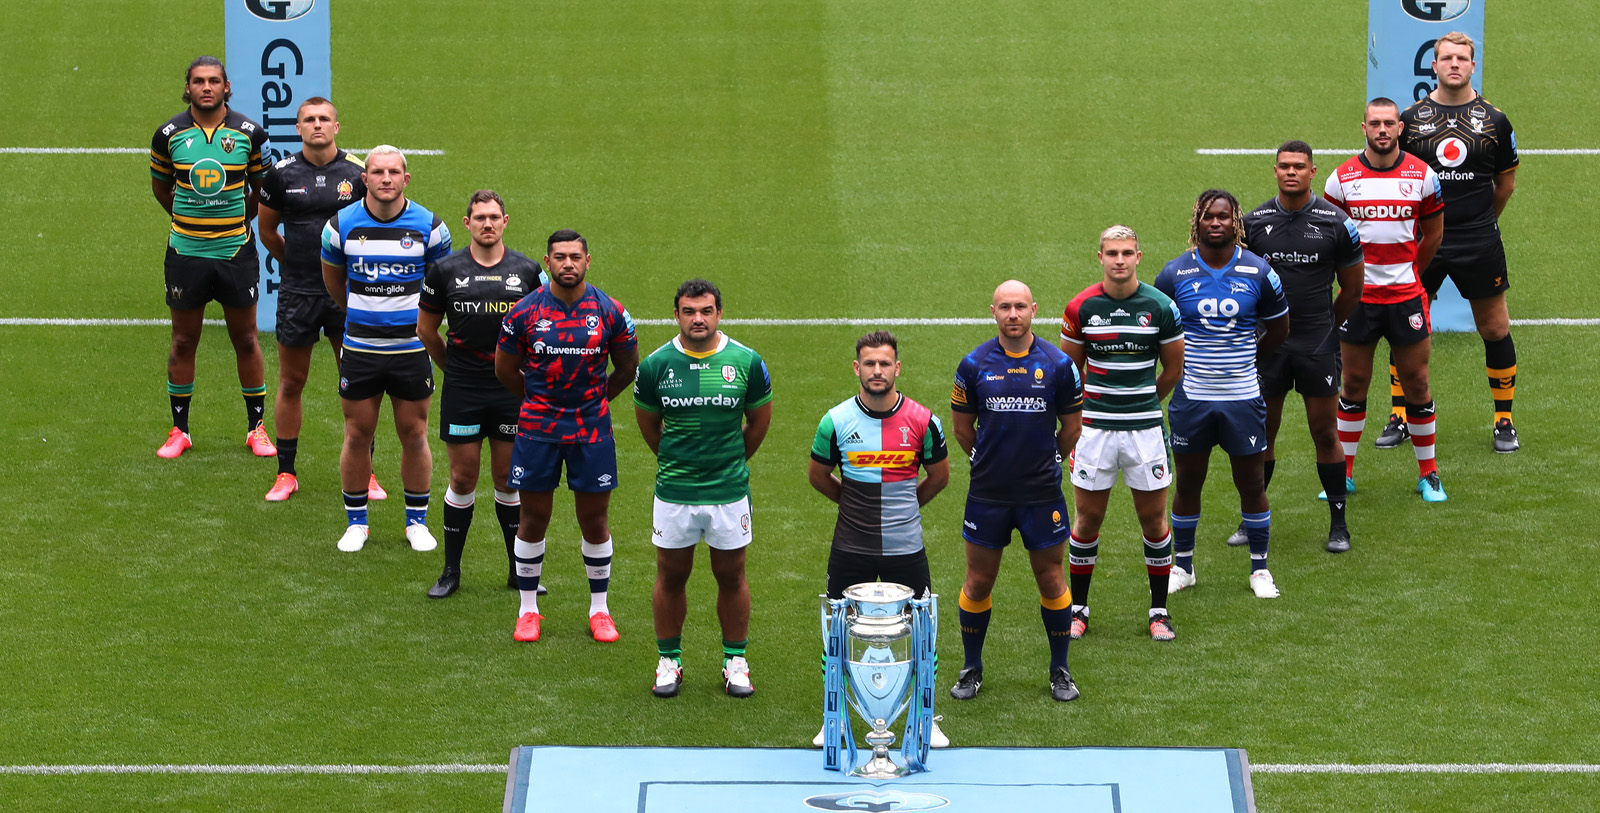 2023/24 Gallagher Premiership Rugby fixtures announced